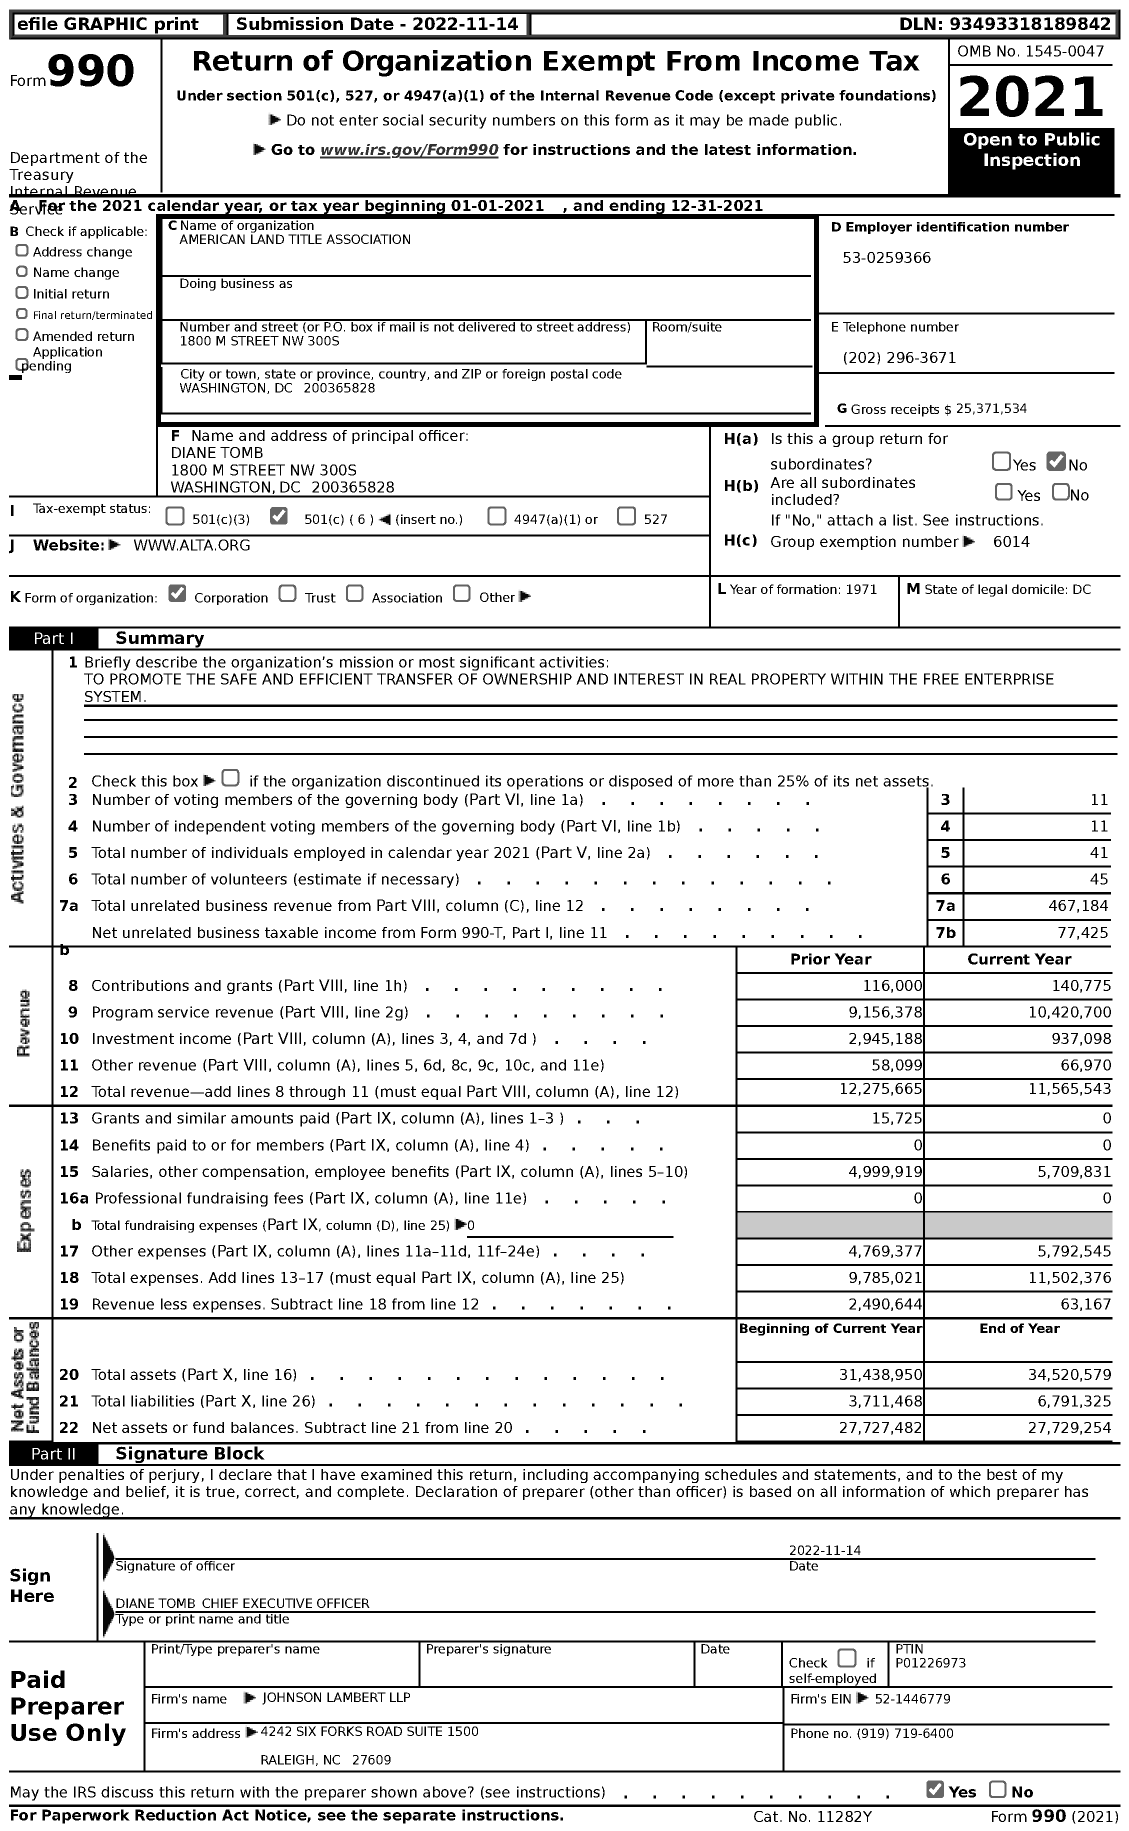 Image of first page of 2021 Form 990 for American Land Title Association (ALTA)